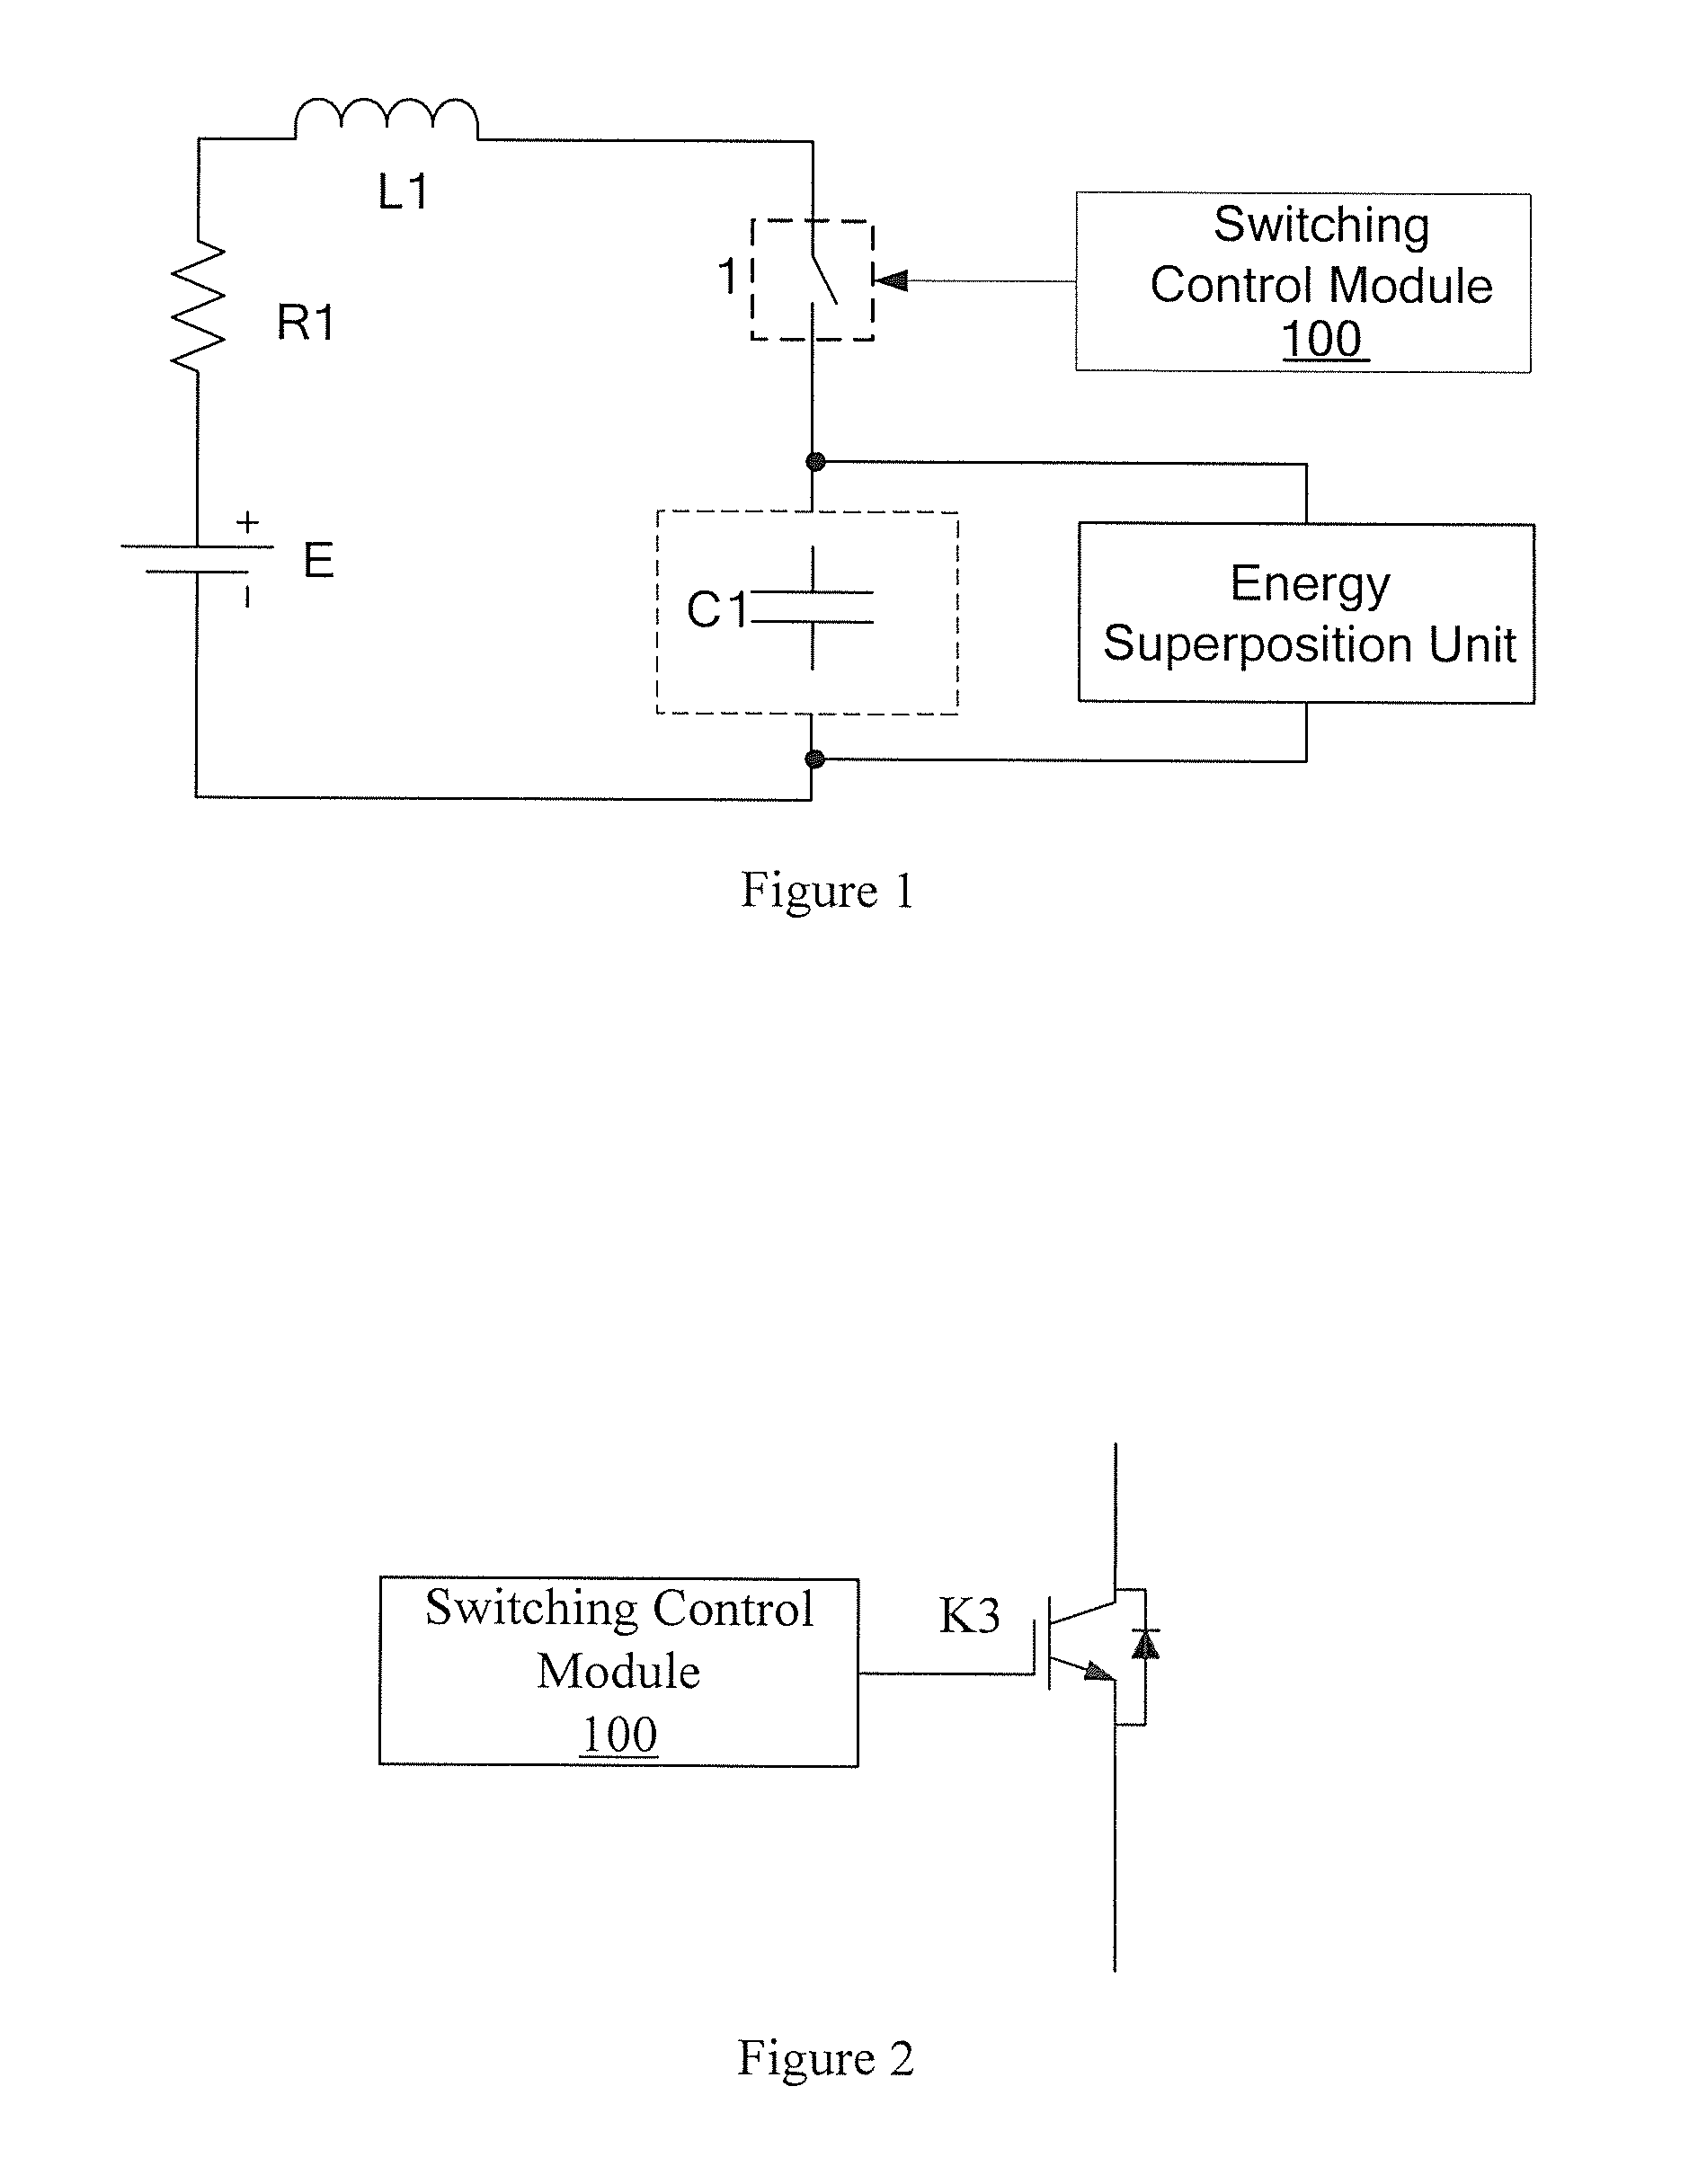 Battery heating circuits and methods with resonance components in series using voltage inversion based on predetermined conditions